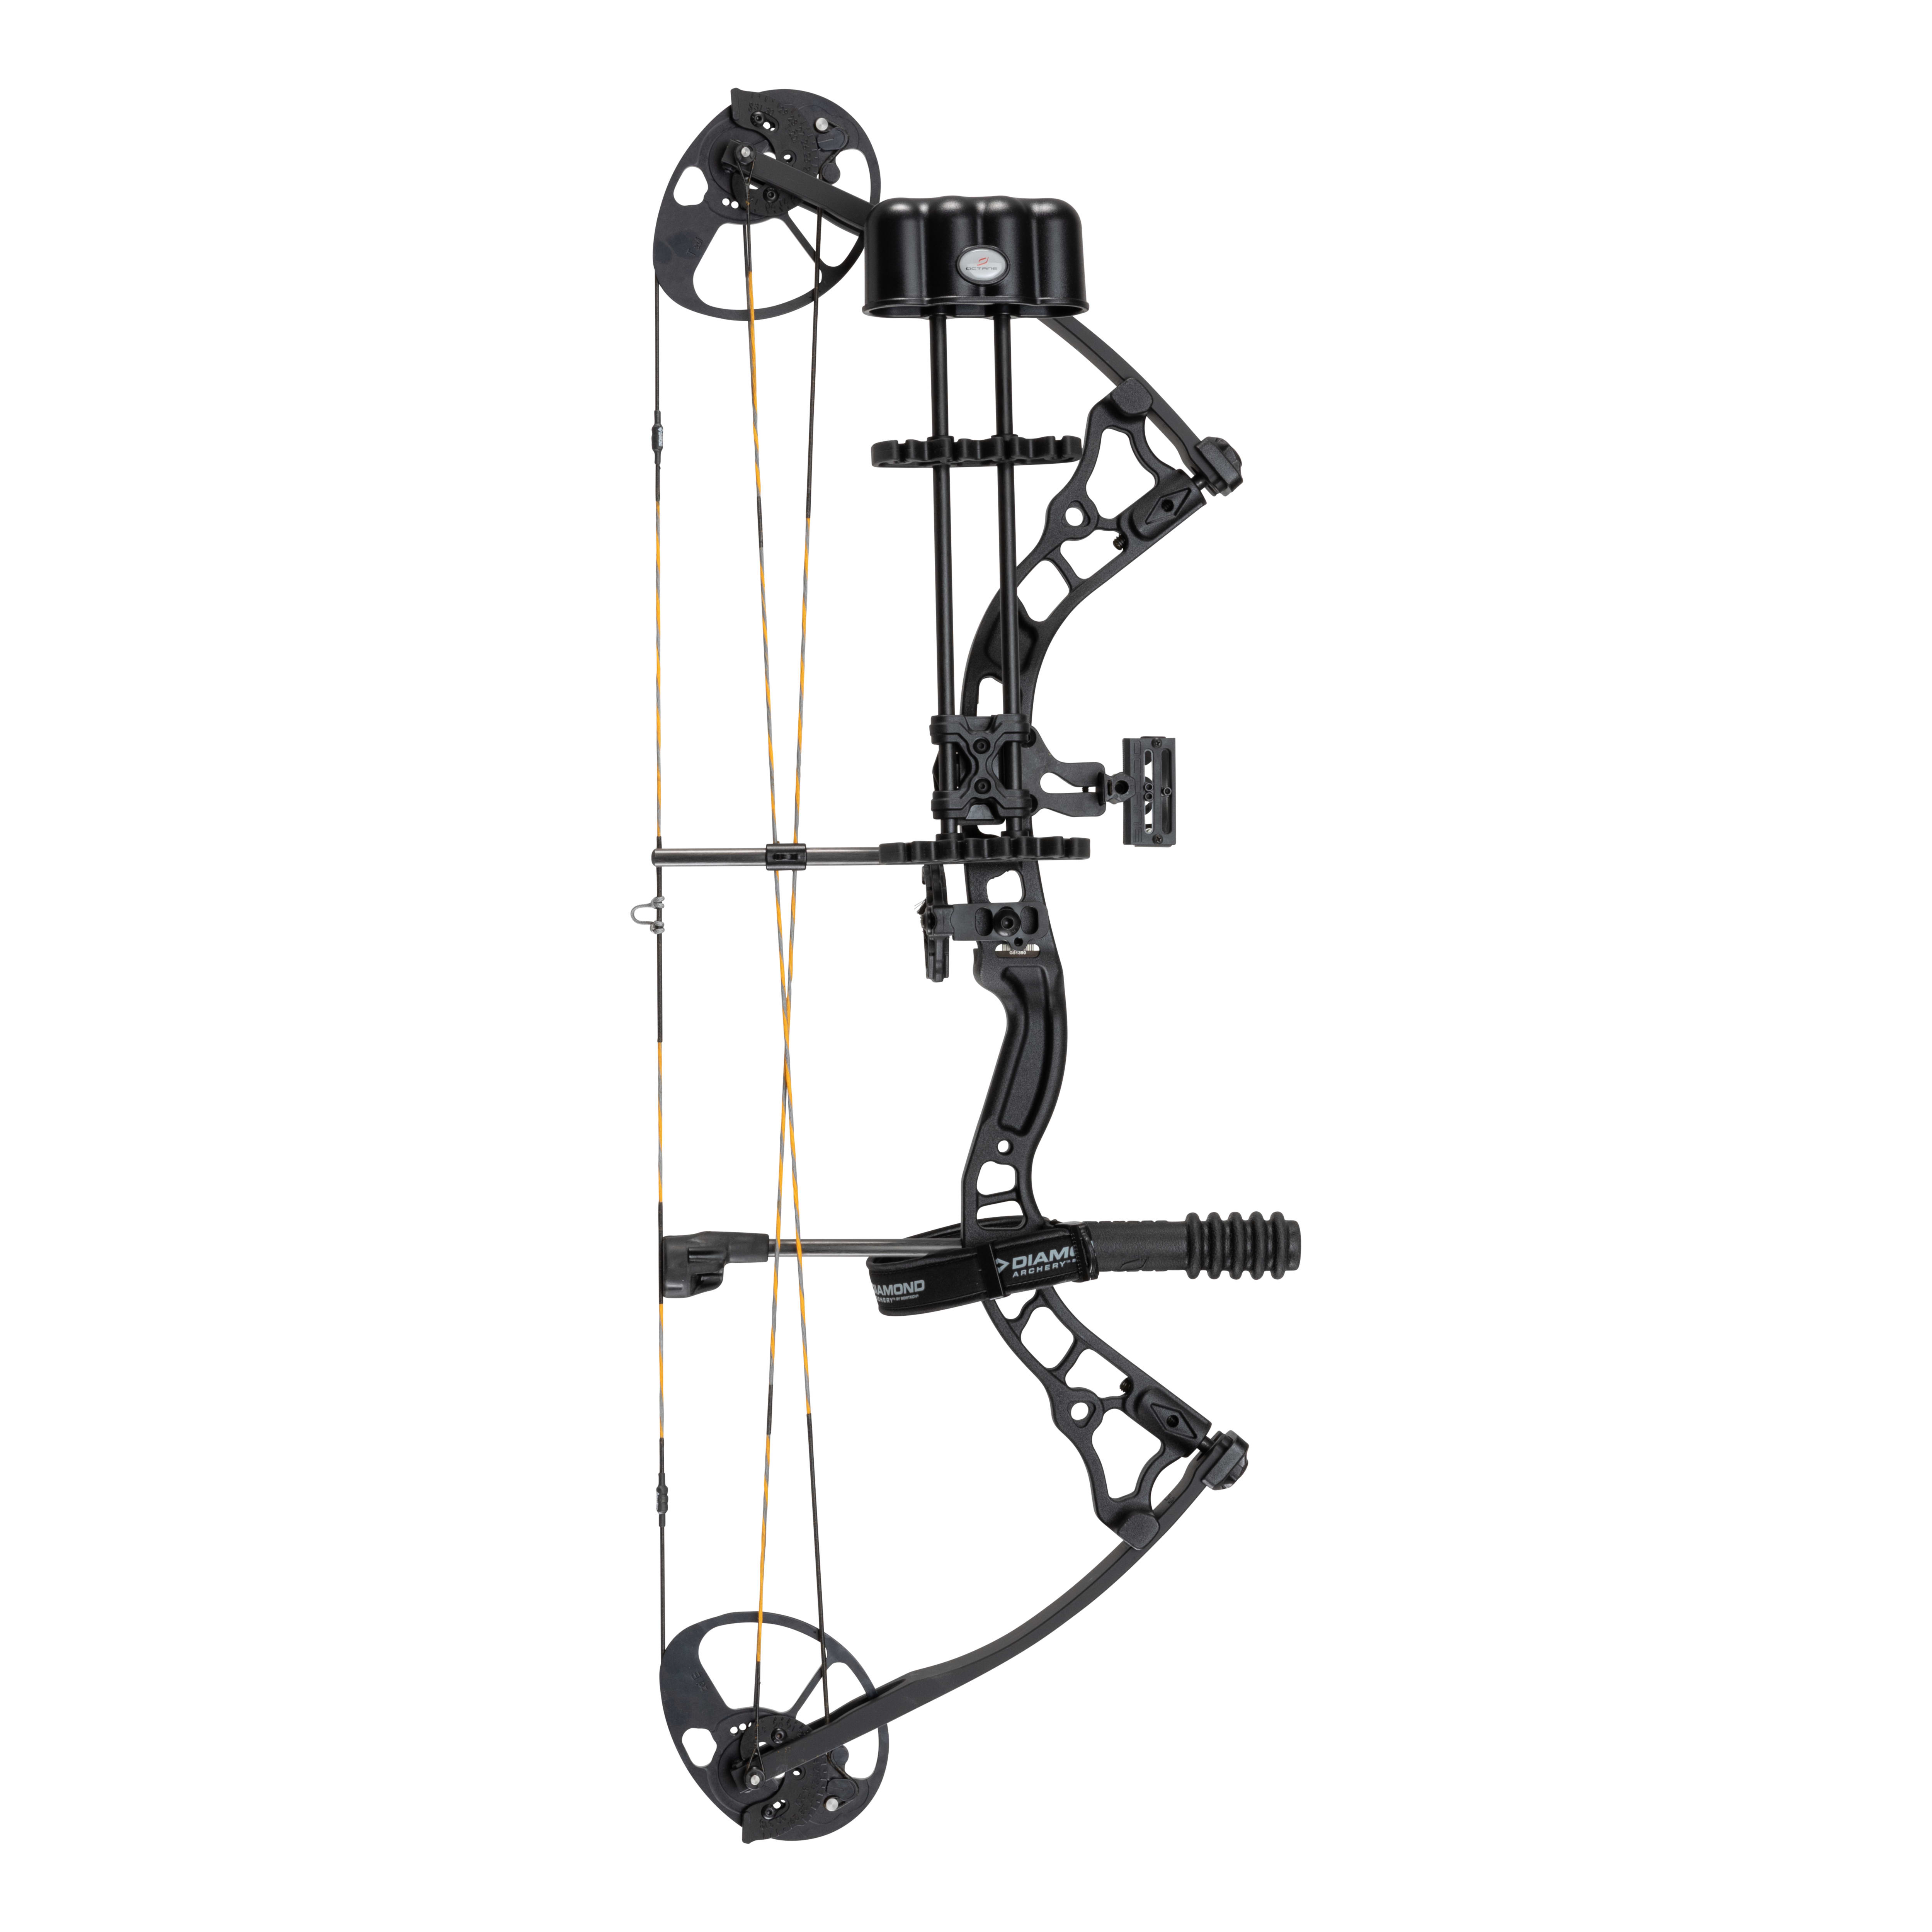 Diamond Infinite 305 Compound Bow Package - Black - Right